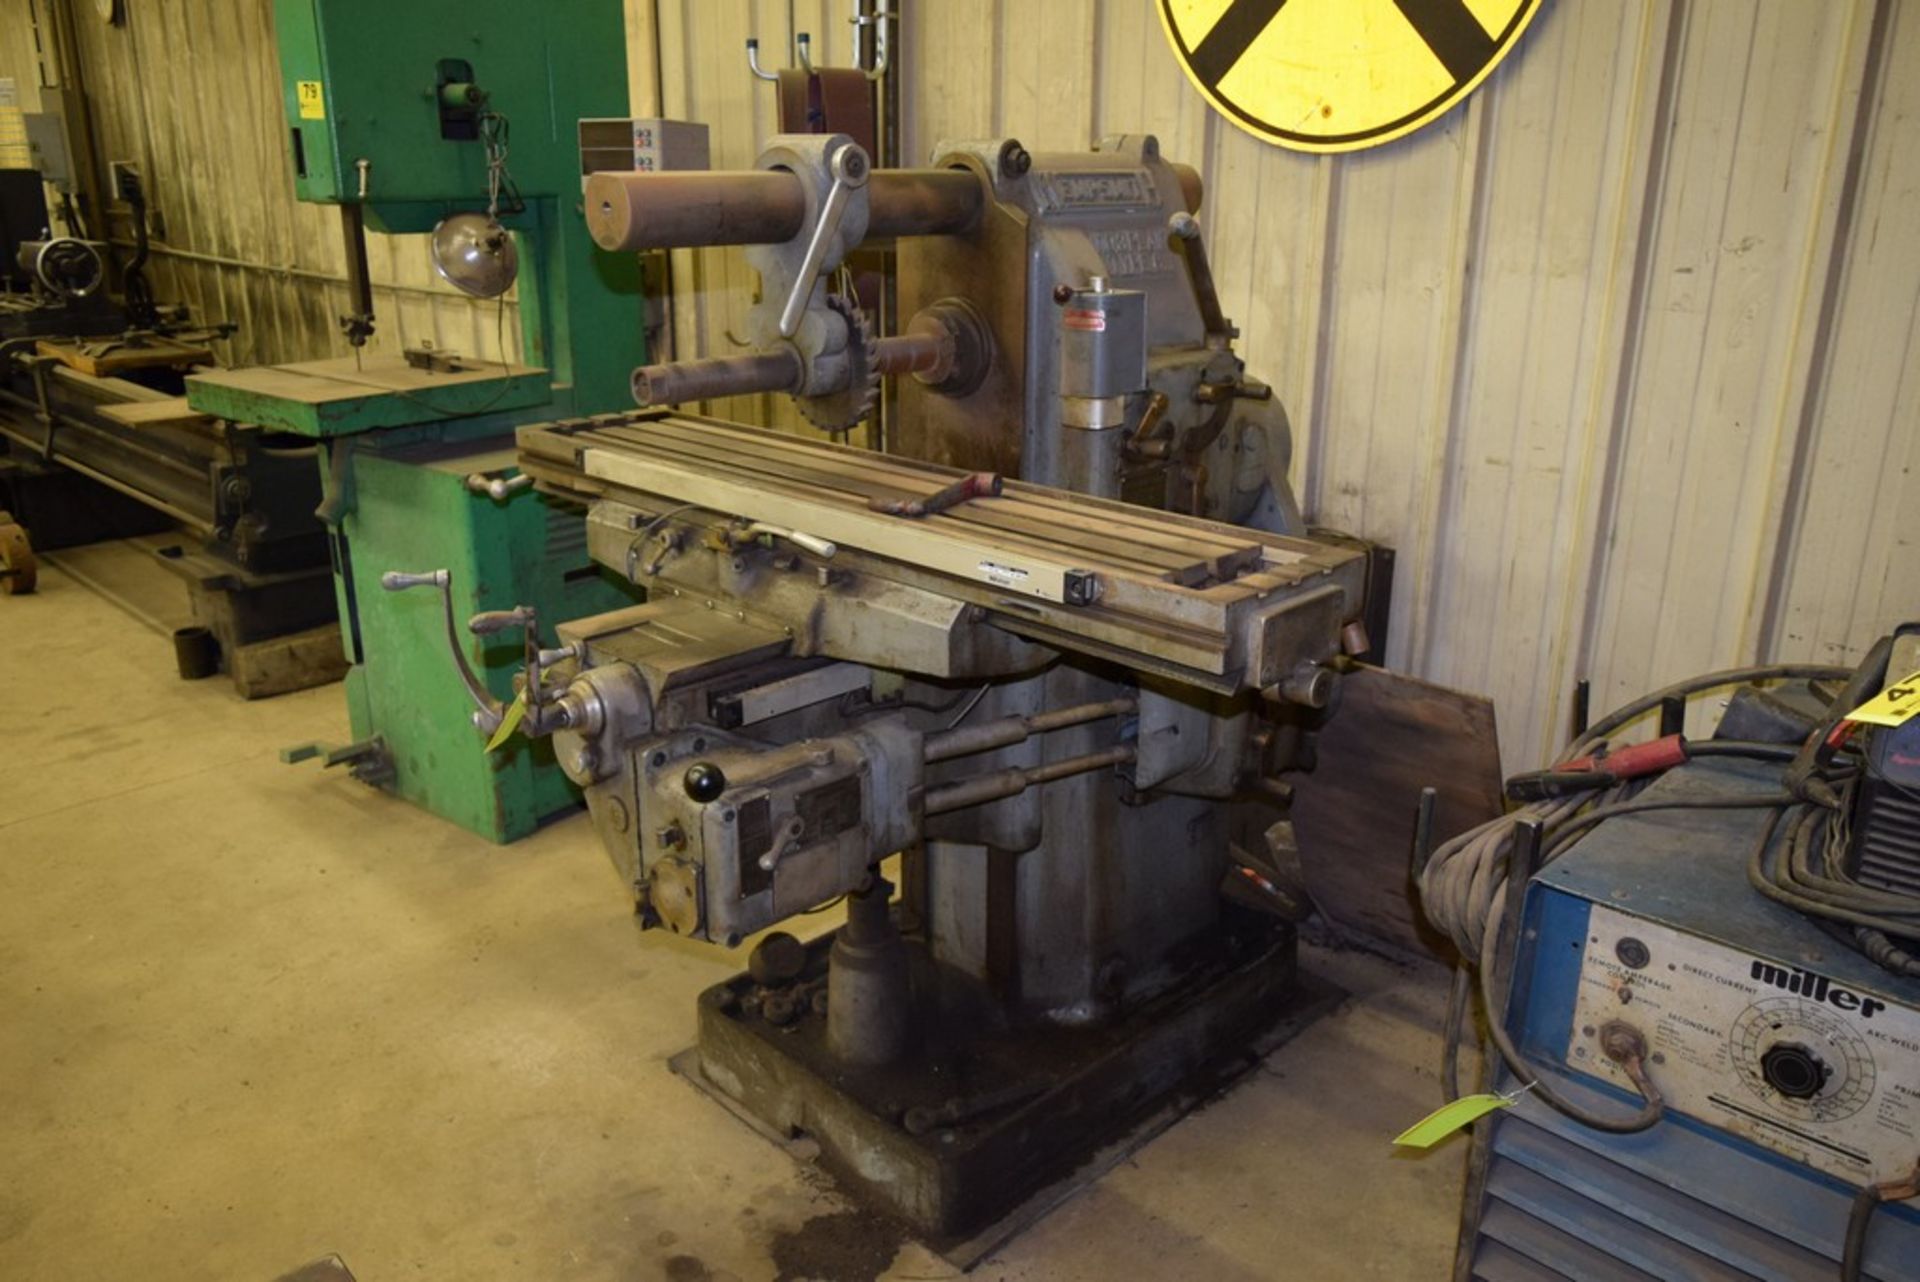 KEMPSMITH NO. 3 PLAIN TYPE C HORIZONTAL MILL, 11-1/2”X56” TABLE, 420 RPM SPINDLE, MITUTOYO DIGITAL - Image 2 of 5